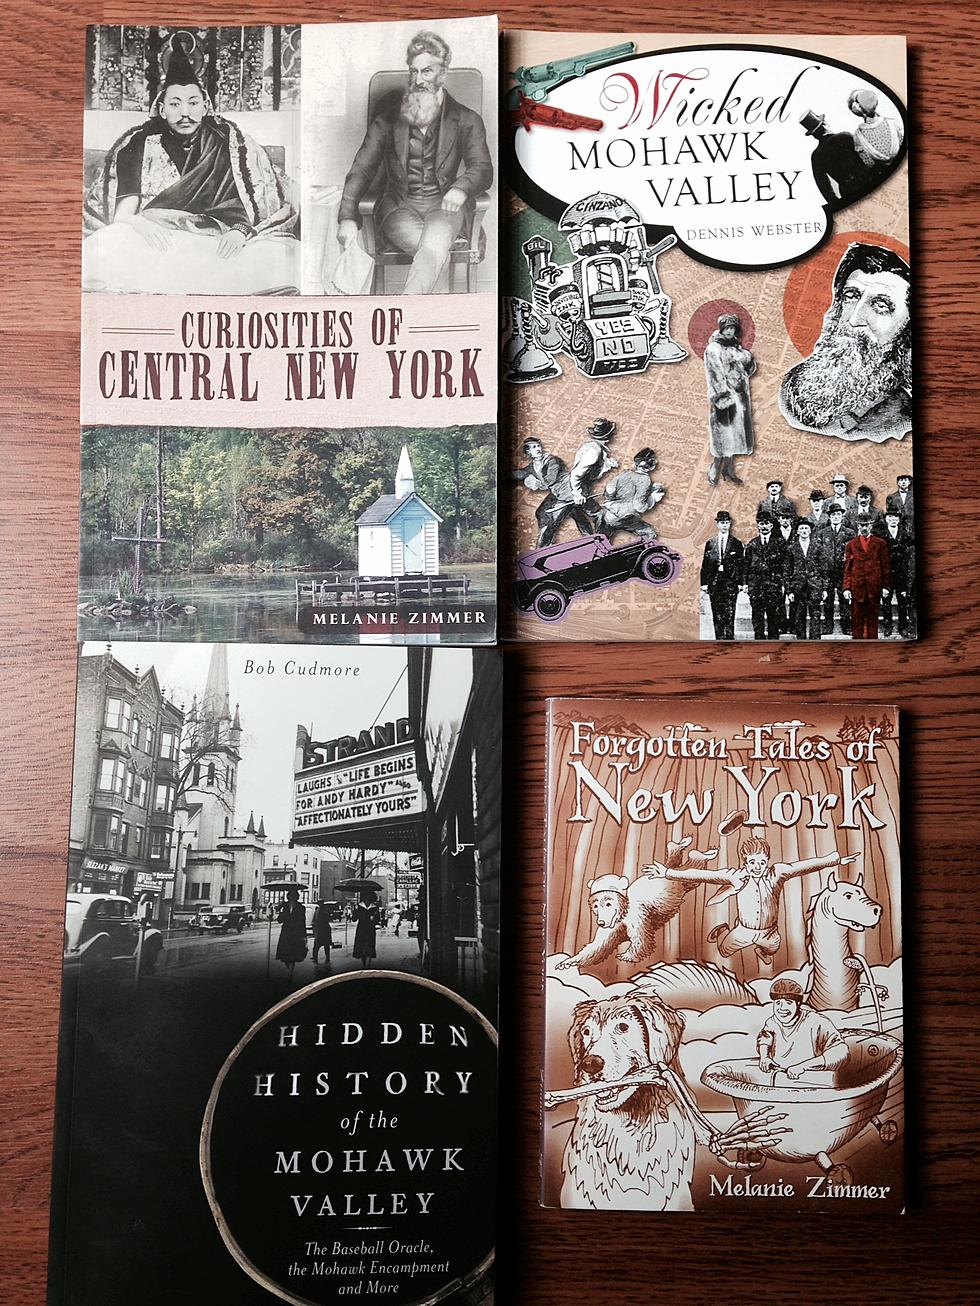 Worth a Read: Books About Mohawk Valley and Central New York History